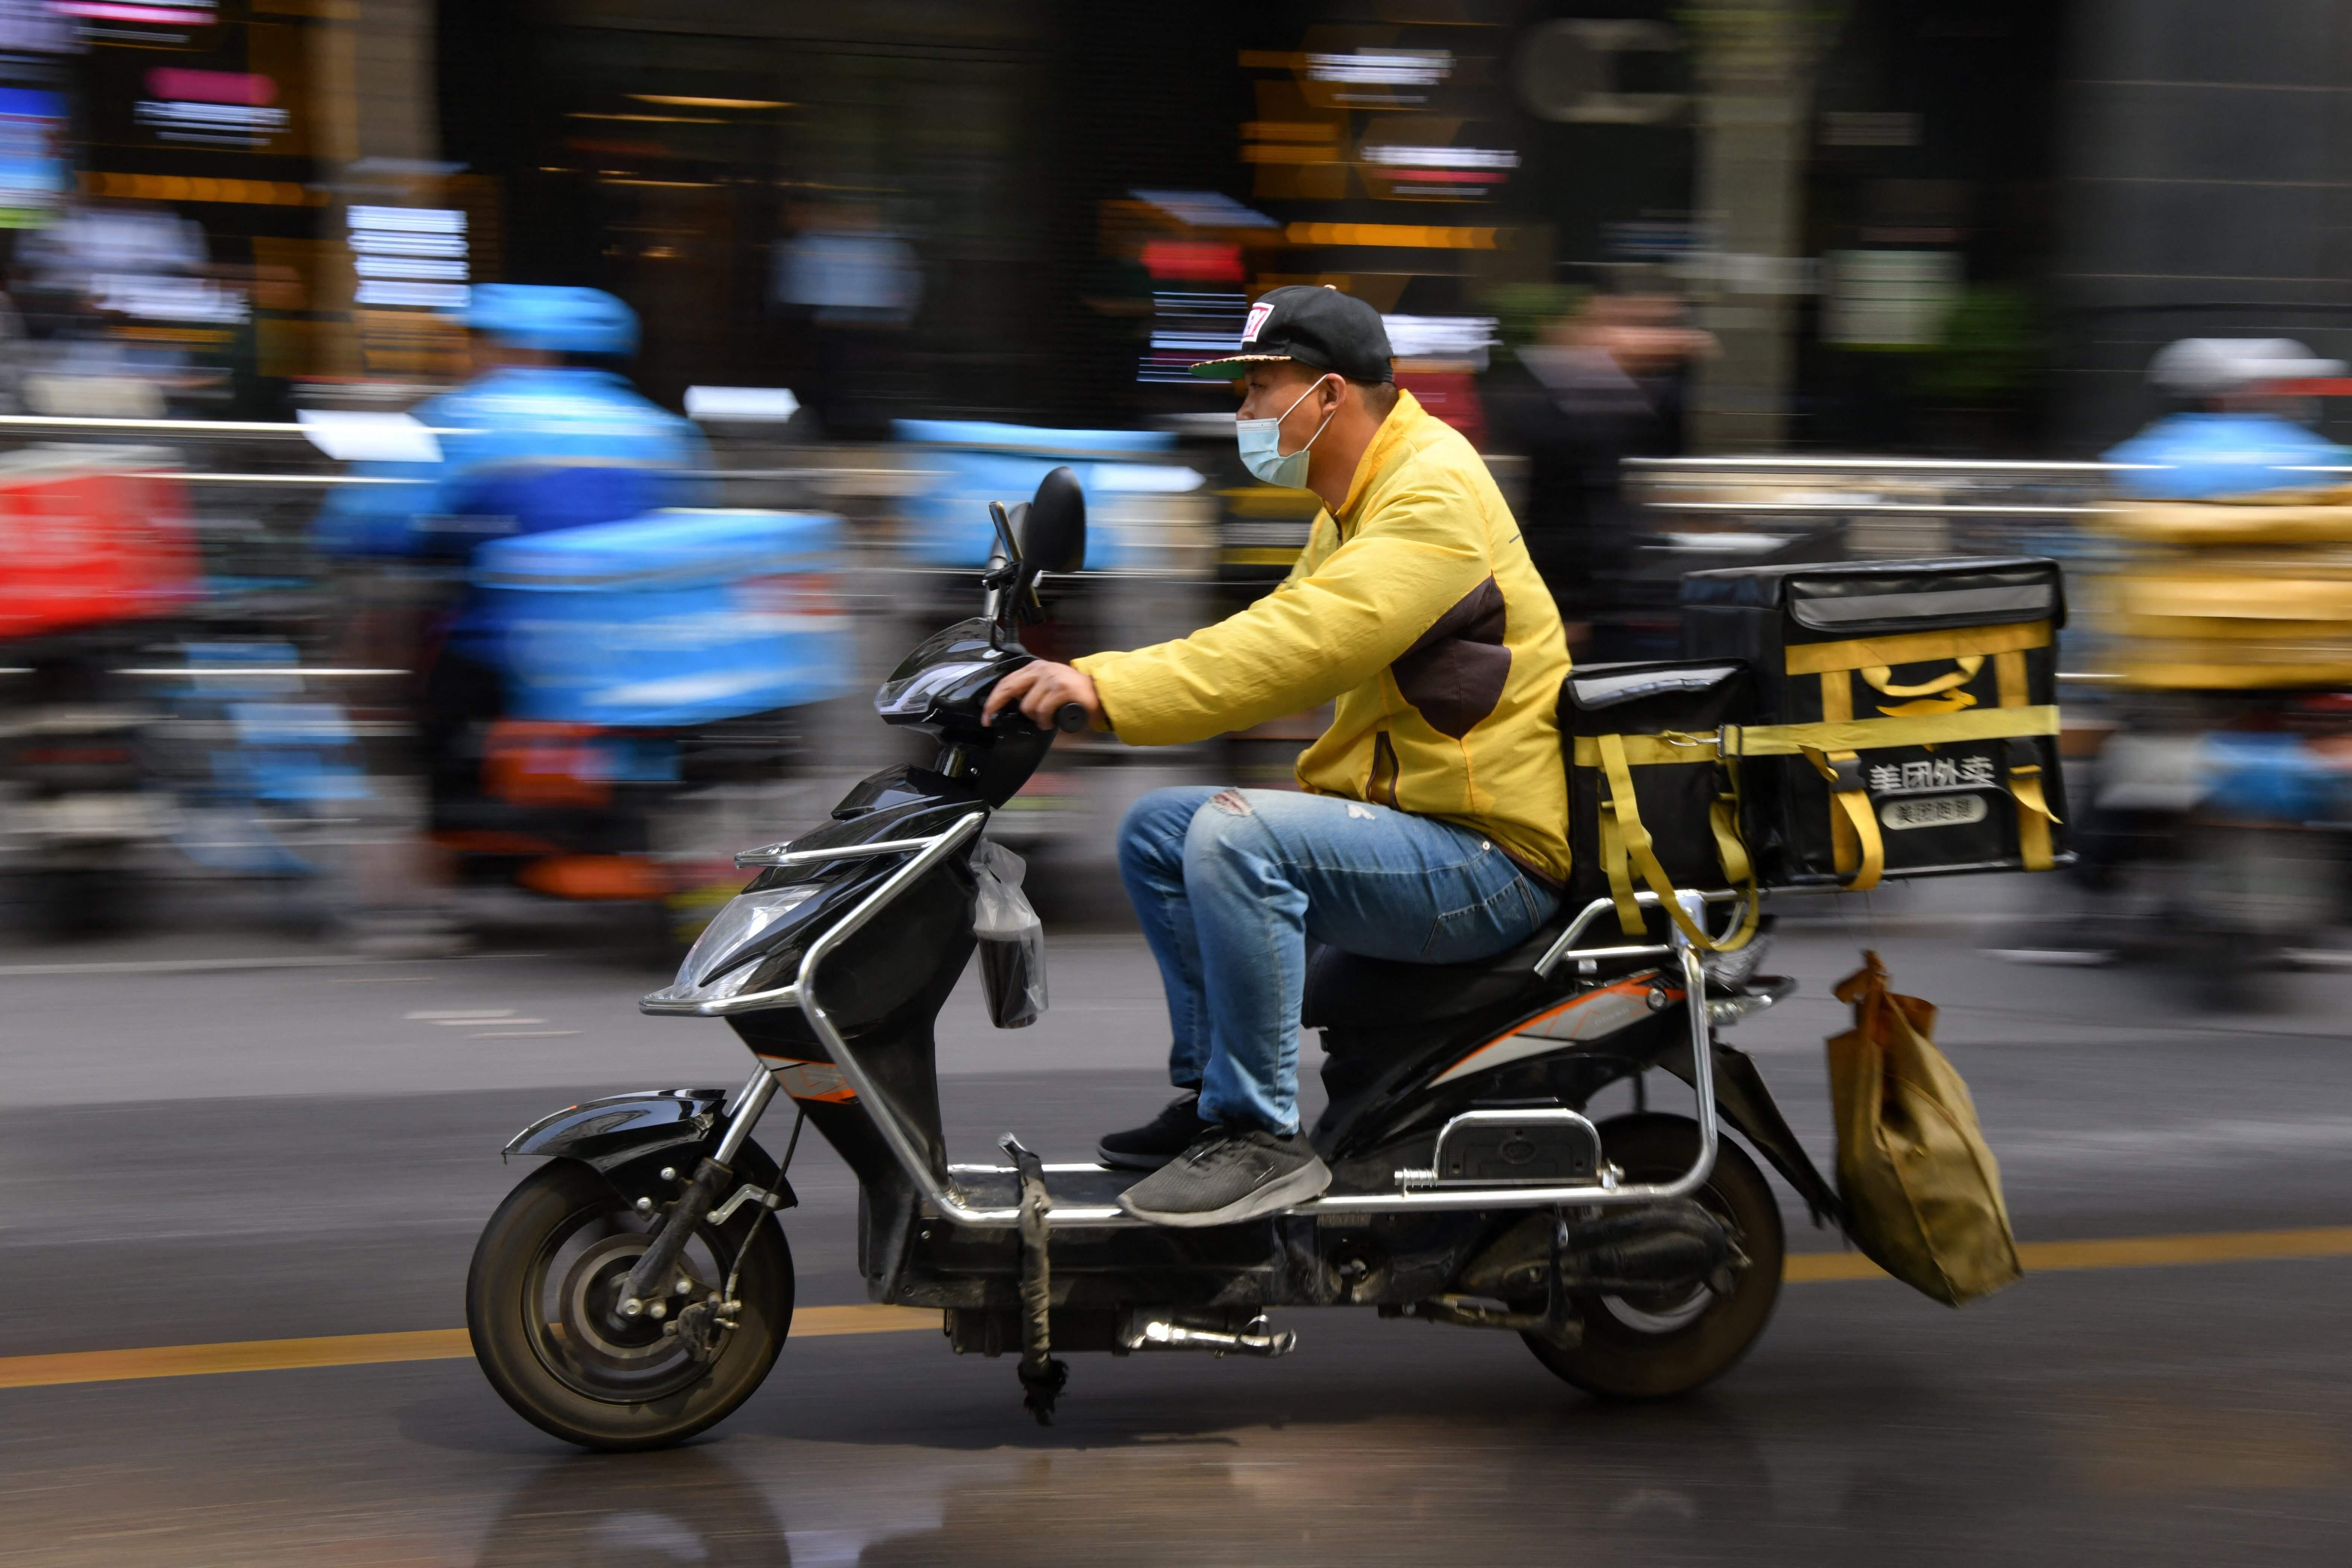 A delivery rider for Meituan, one of China's biggest food delivery firms, heads out to make a food delivery after picking it up at a restaurant in Beijing on April 27, 2021. Photo: AFP